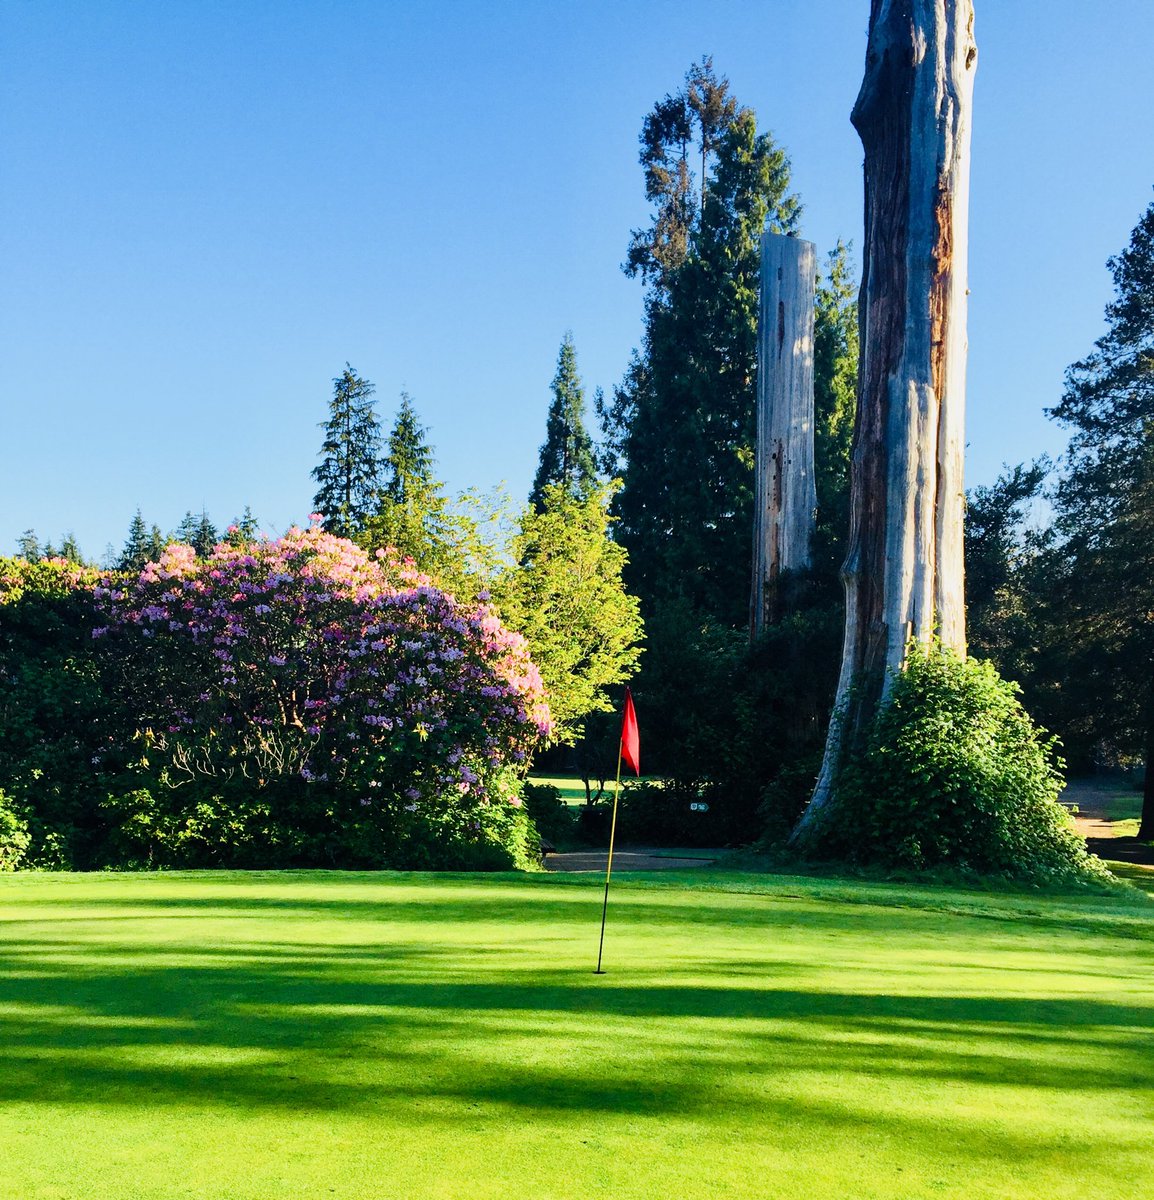 Golf Course in Stanley Park, Vancouver, BC, Canada